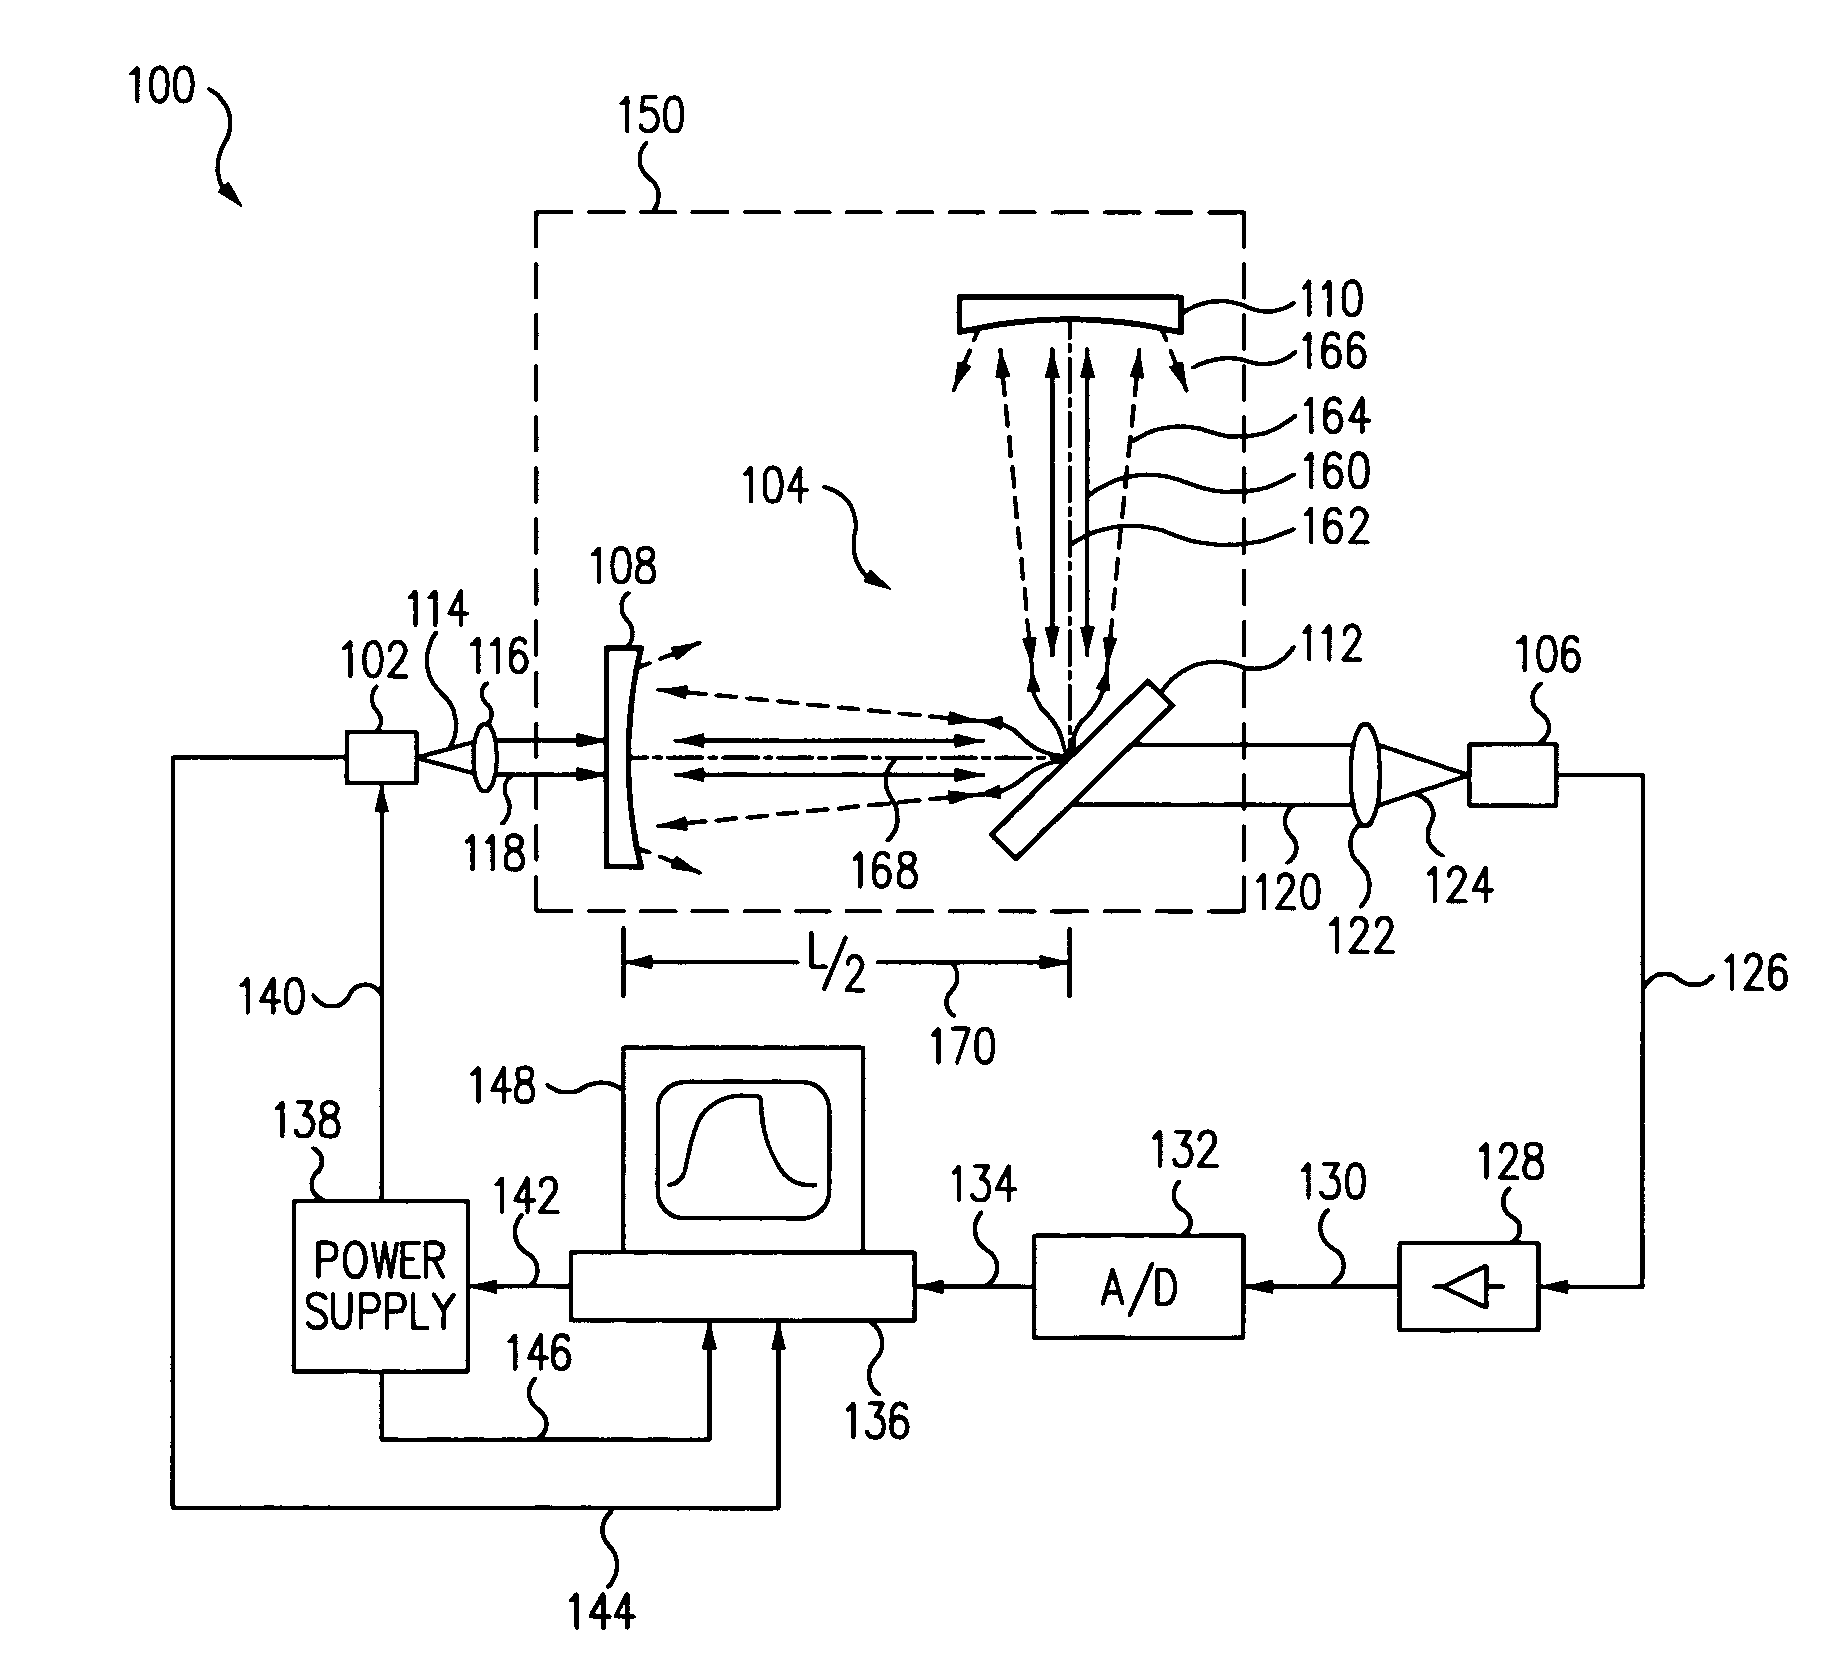 Light scatter measurement apparatus and method